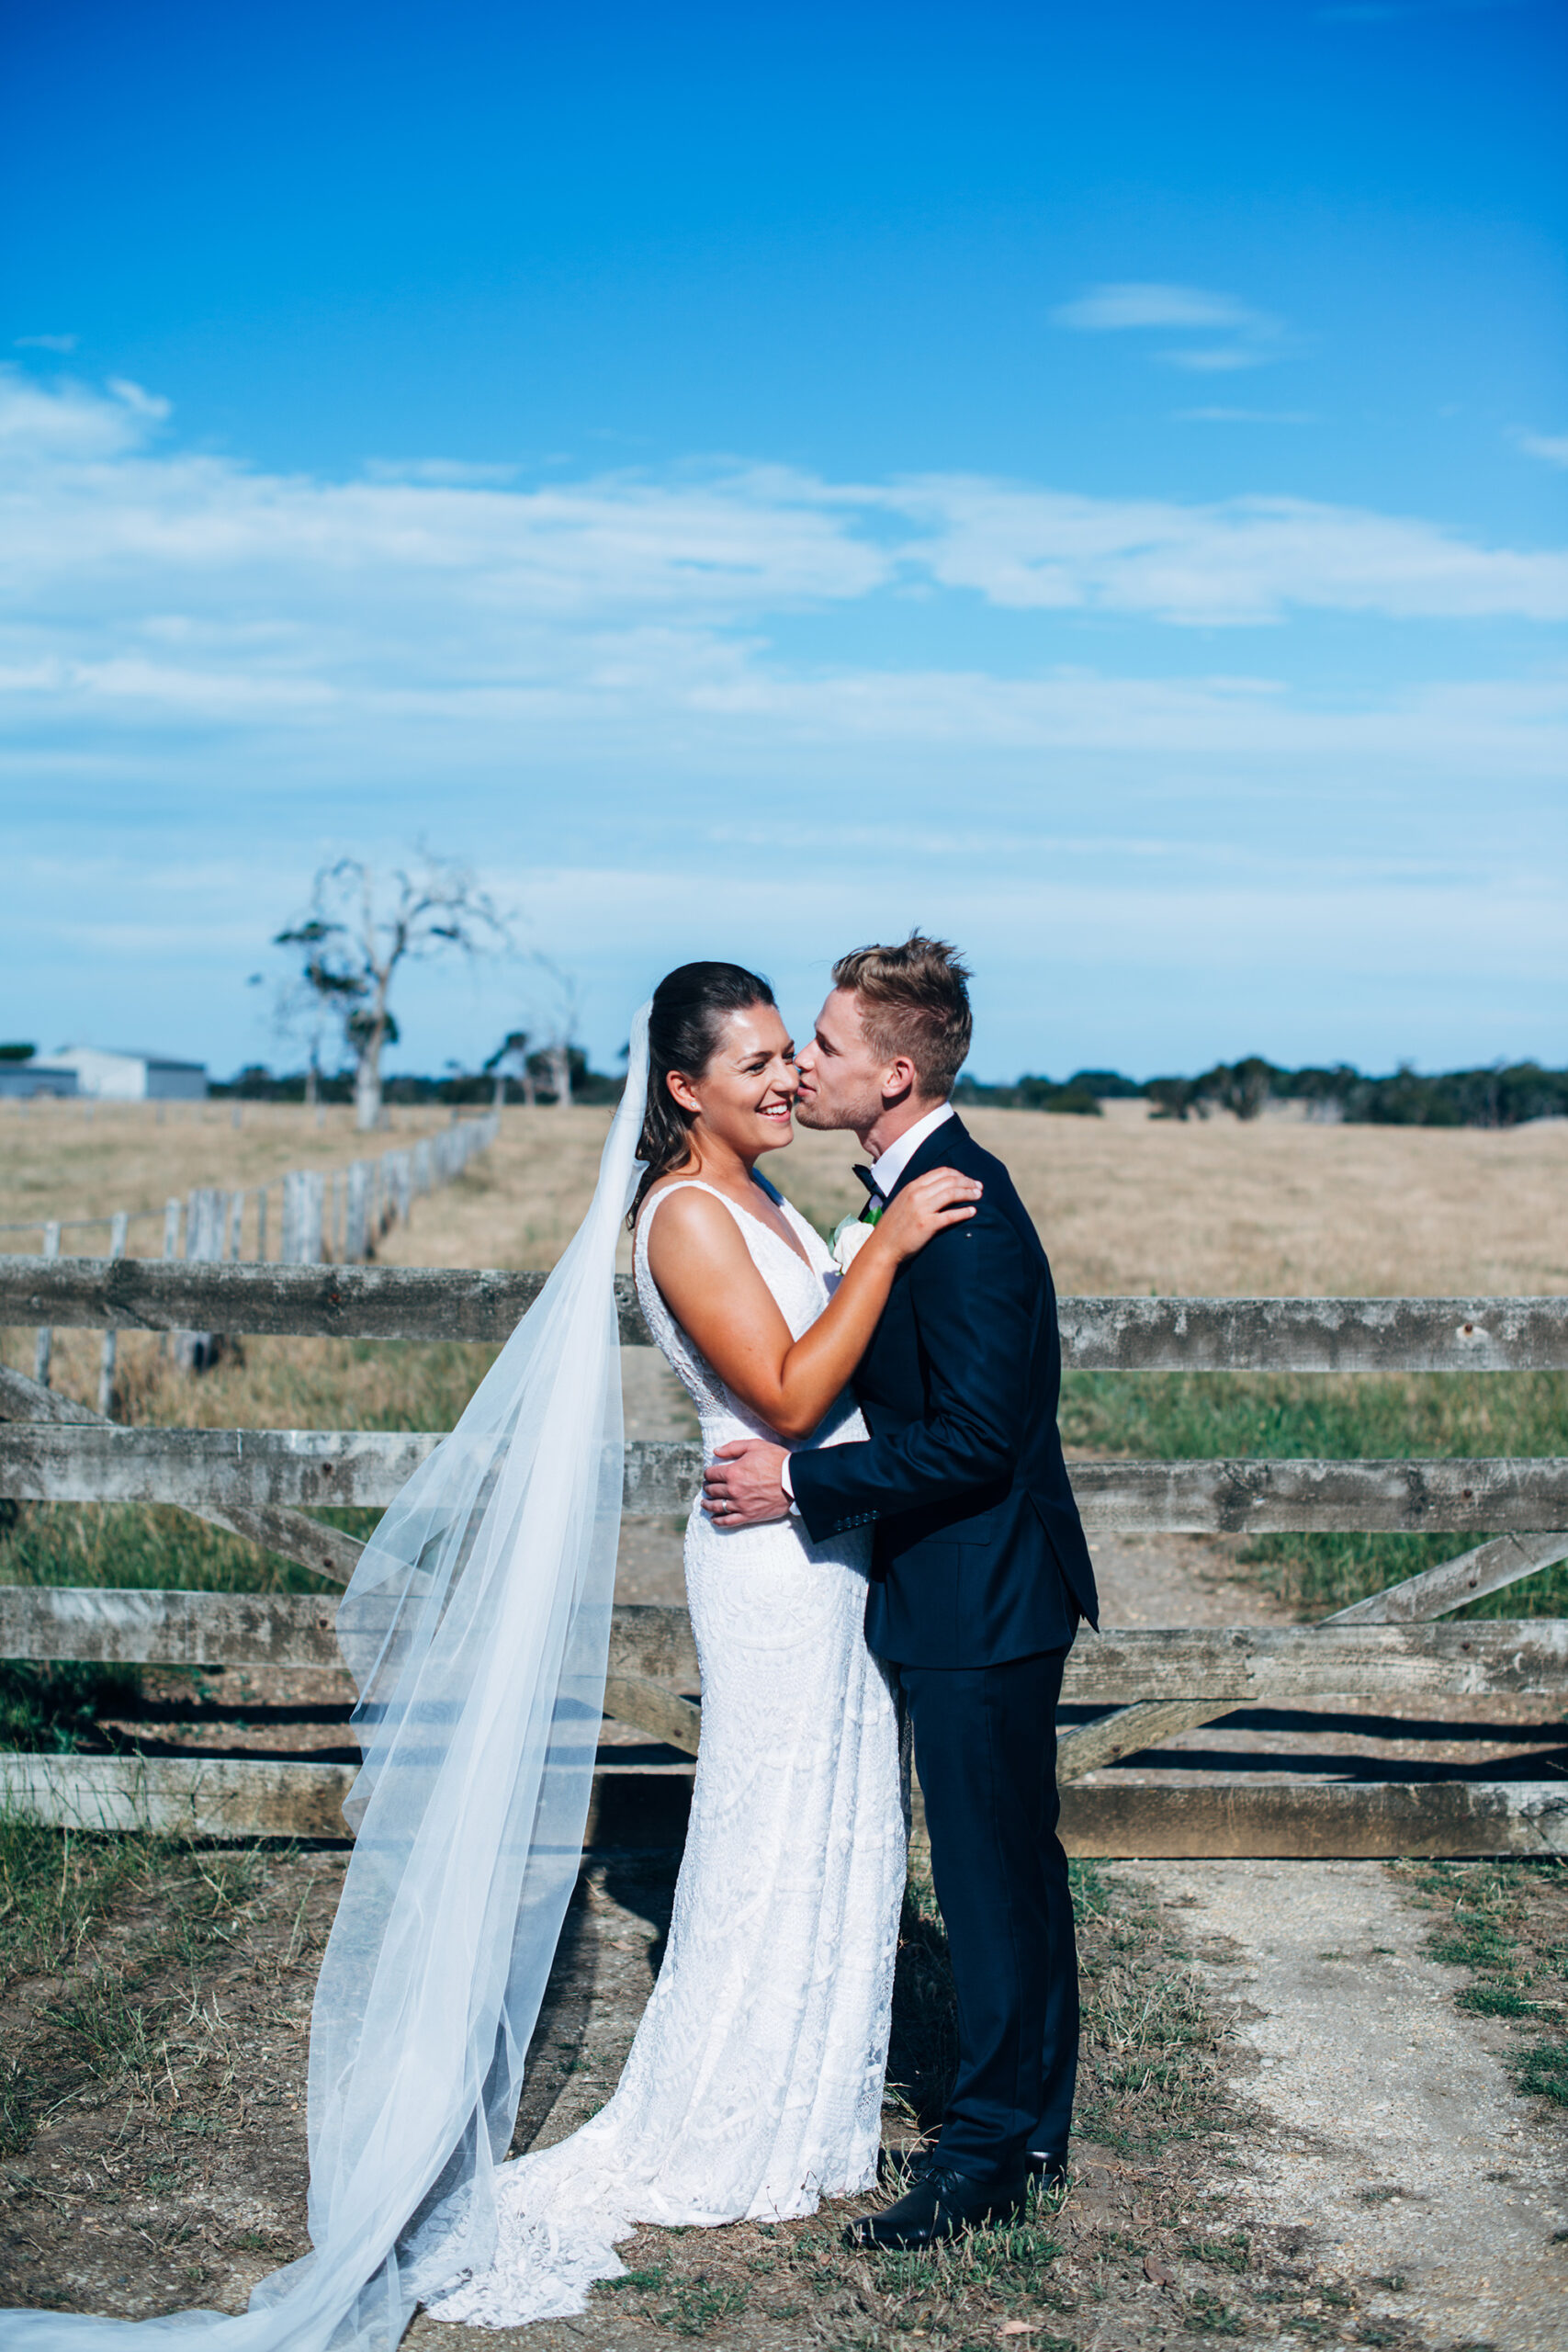 Danielle Seamus Elegant Rustic Wedding Love Other Photography SBS 021 scaled